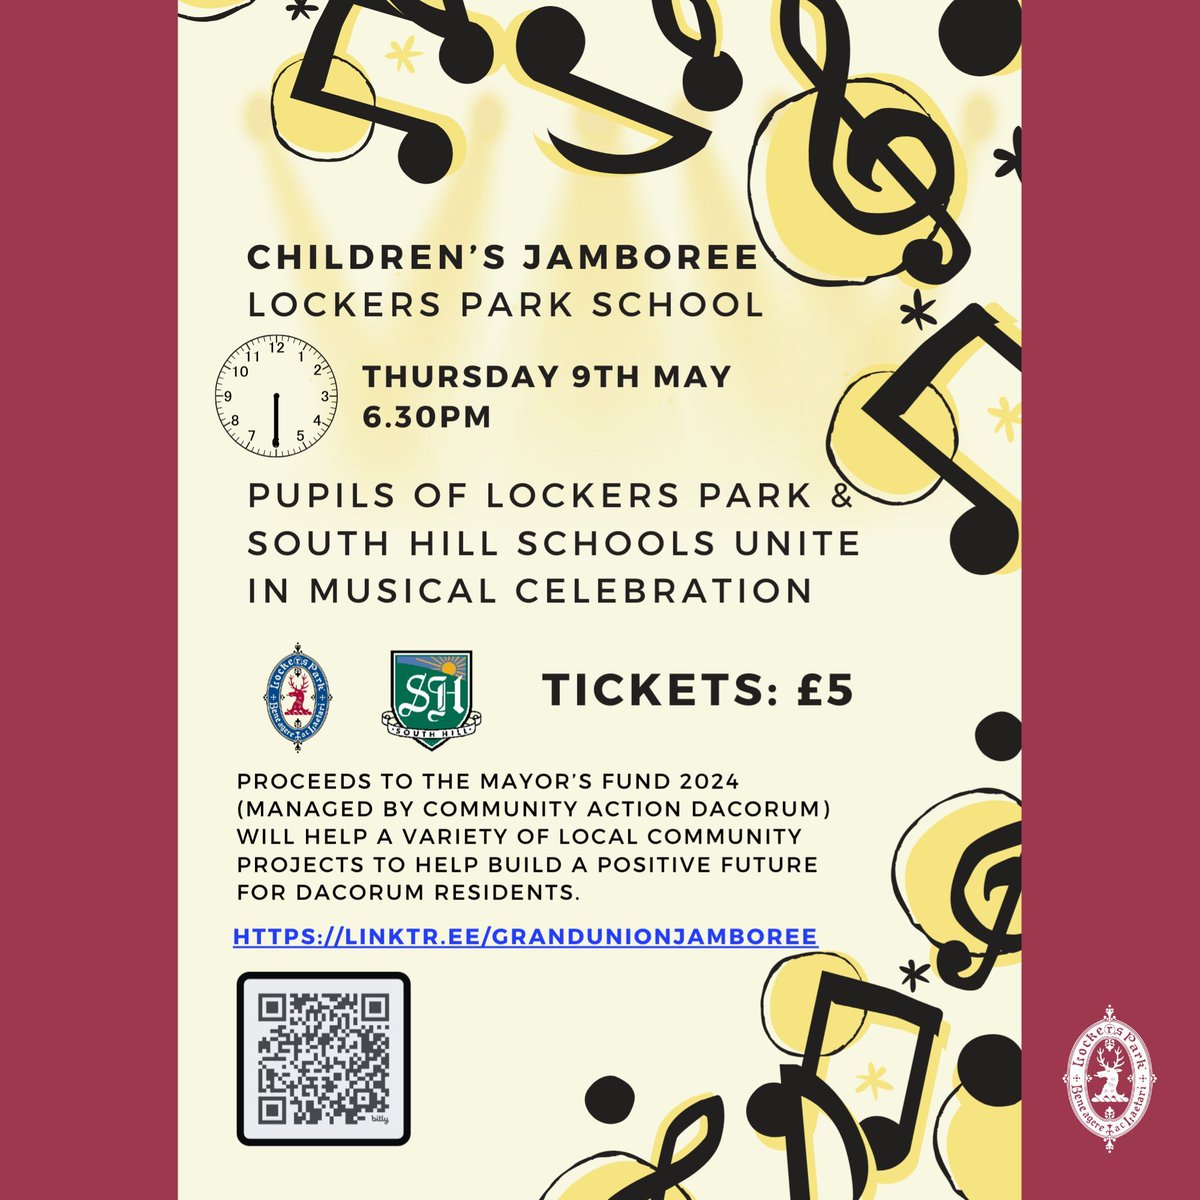 We are delighted to be part of the Mayor of Dacorum’s Musical Jamboree next month.

The Lockers Park boys are joining together with pupils from South Hill School to perform an evening of musical entertainment including instrumental and choral.

Book your ticket at our website